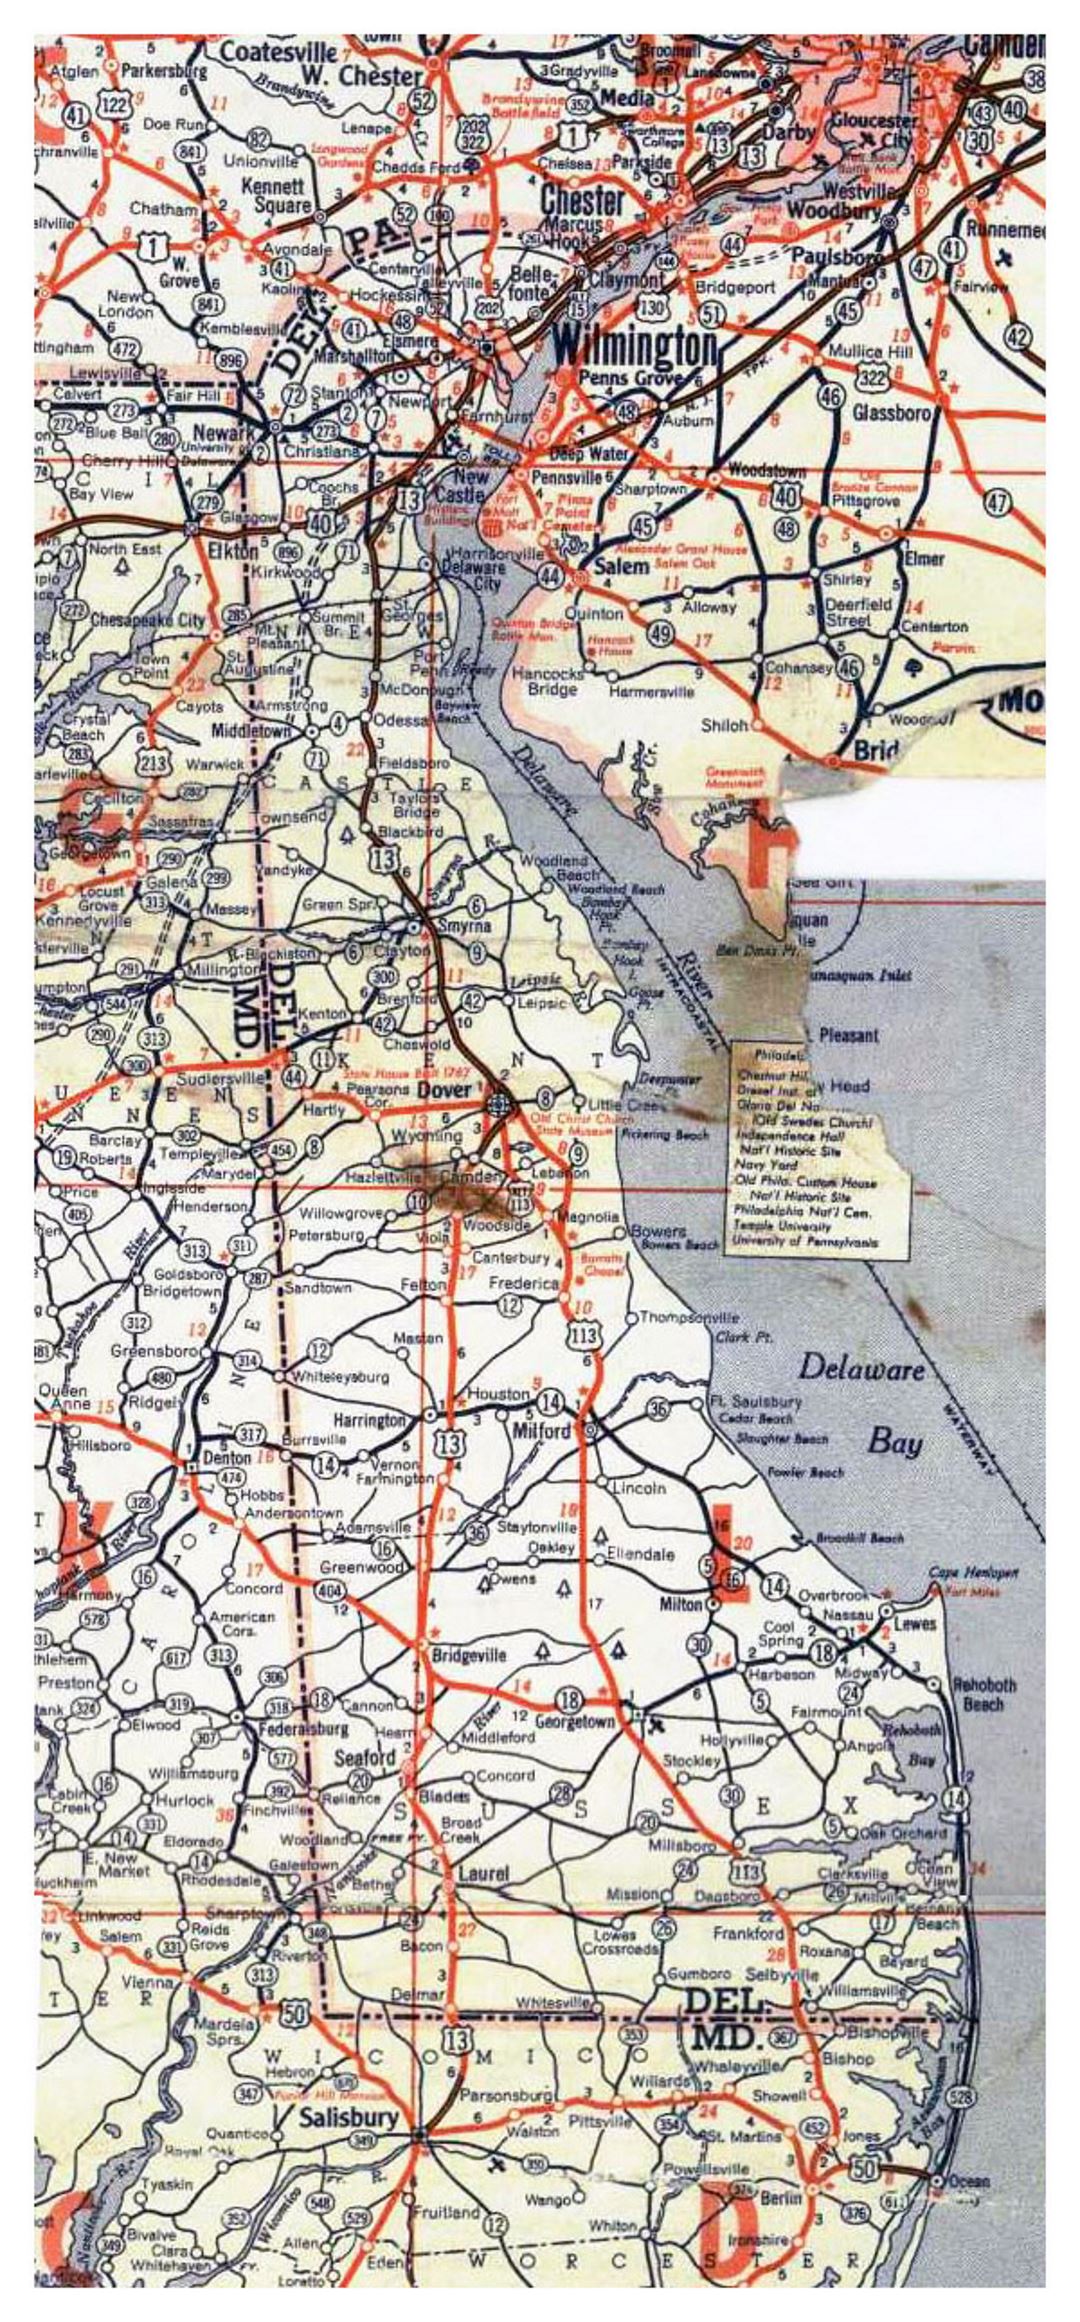 Roads and highways map of Delaware state - 1951